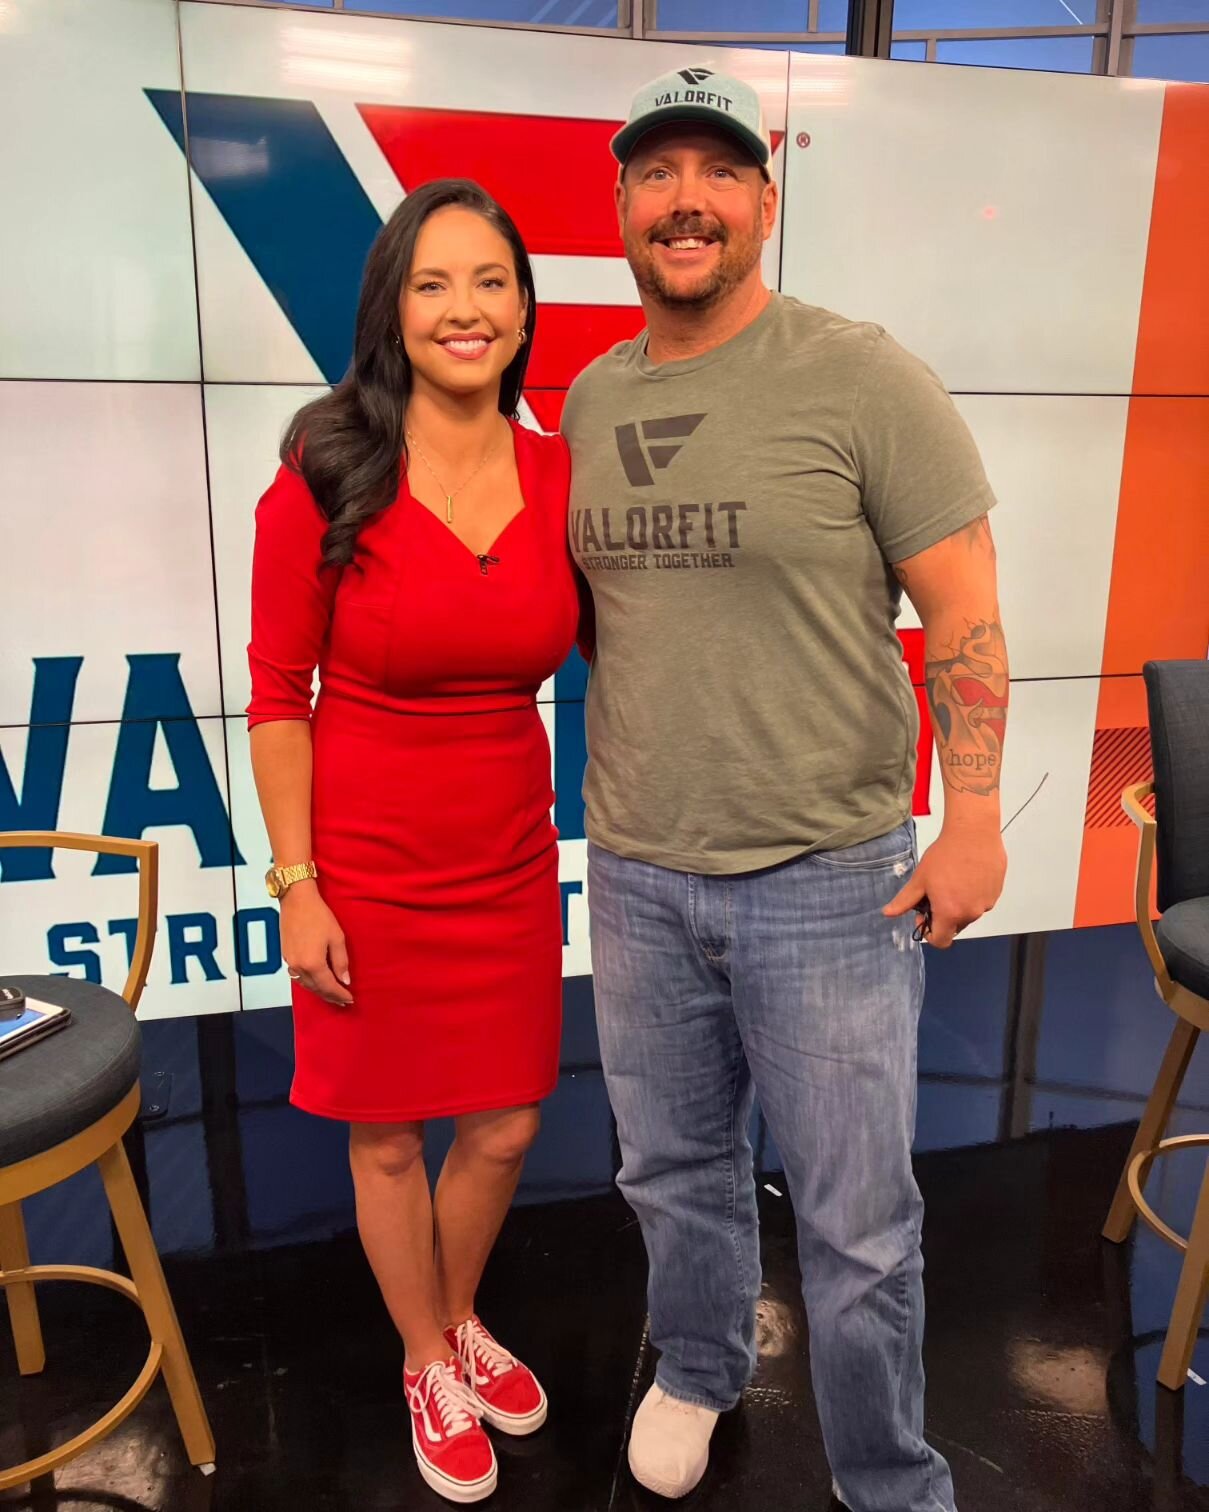 We would like to say thank you to @weareiowa news anchor @samanthamesatv_ for highlighting the Valorfit organization last week leading up to Veterans Day. She liked it so much we are going to do another story with her tomorrow but this time we will d